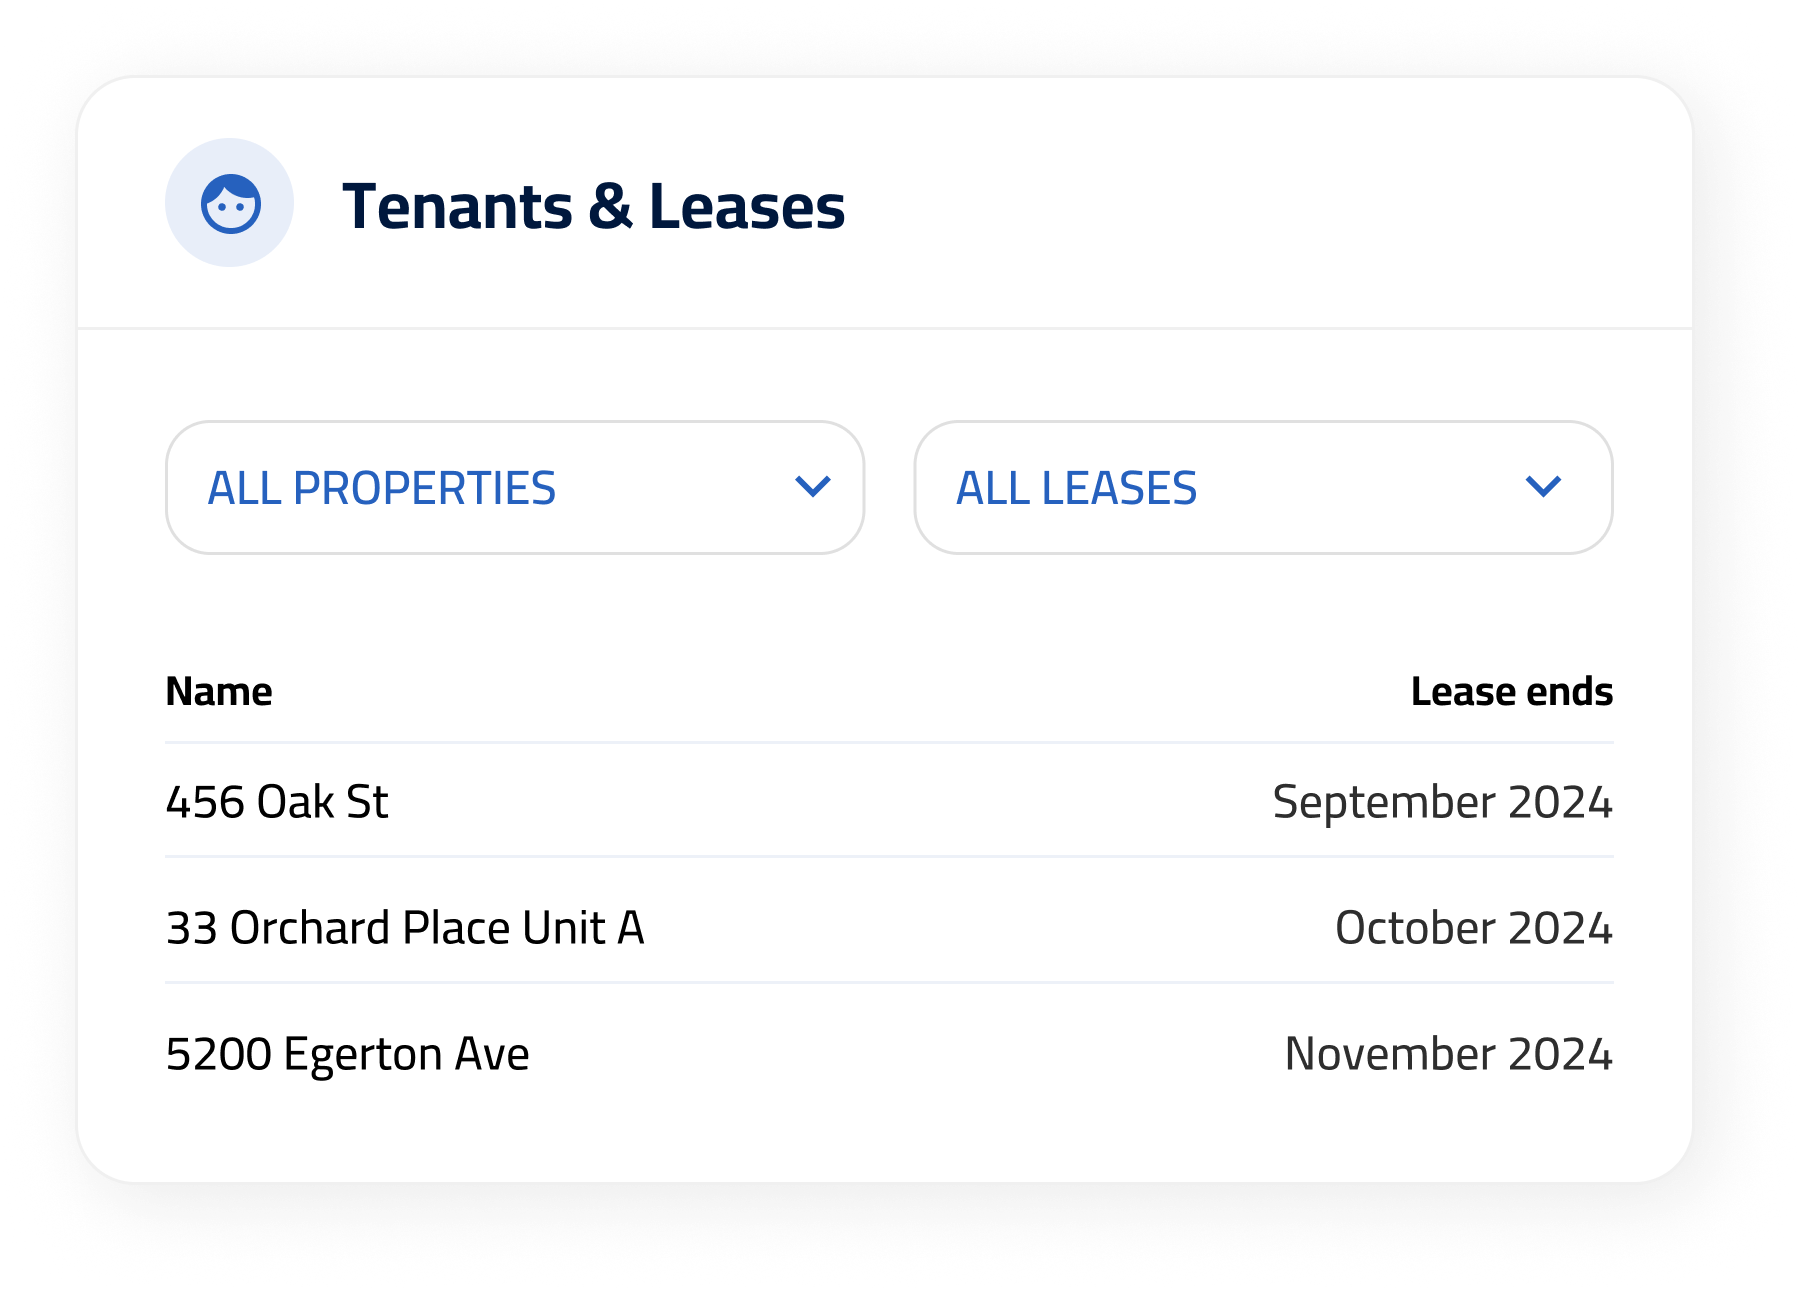 Showing Tenants and Leases